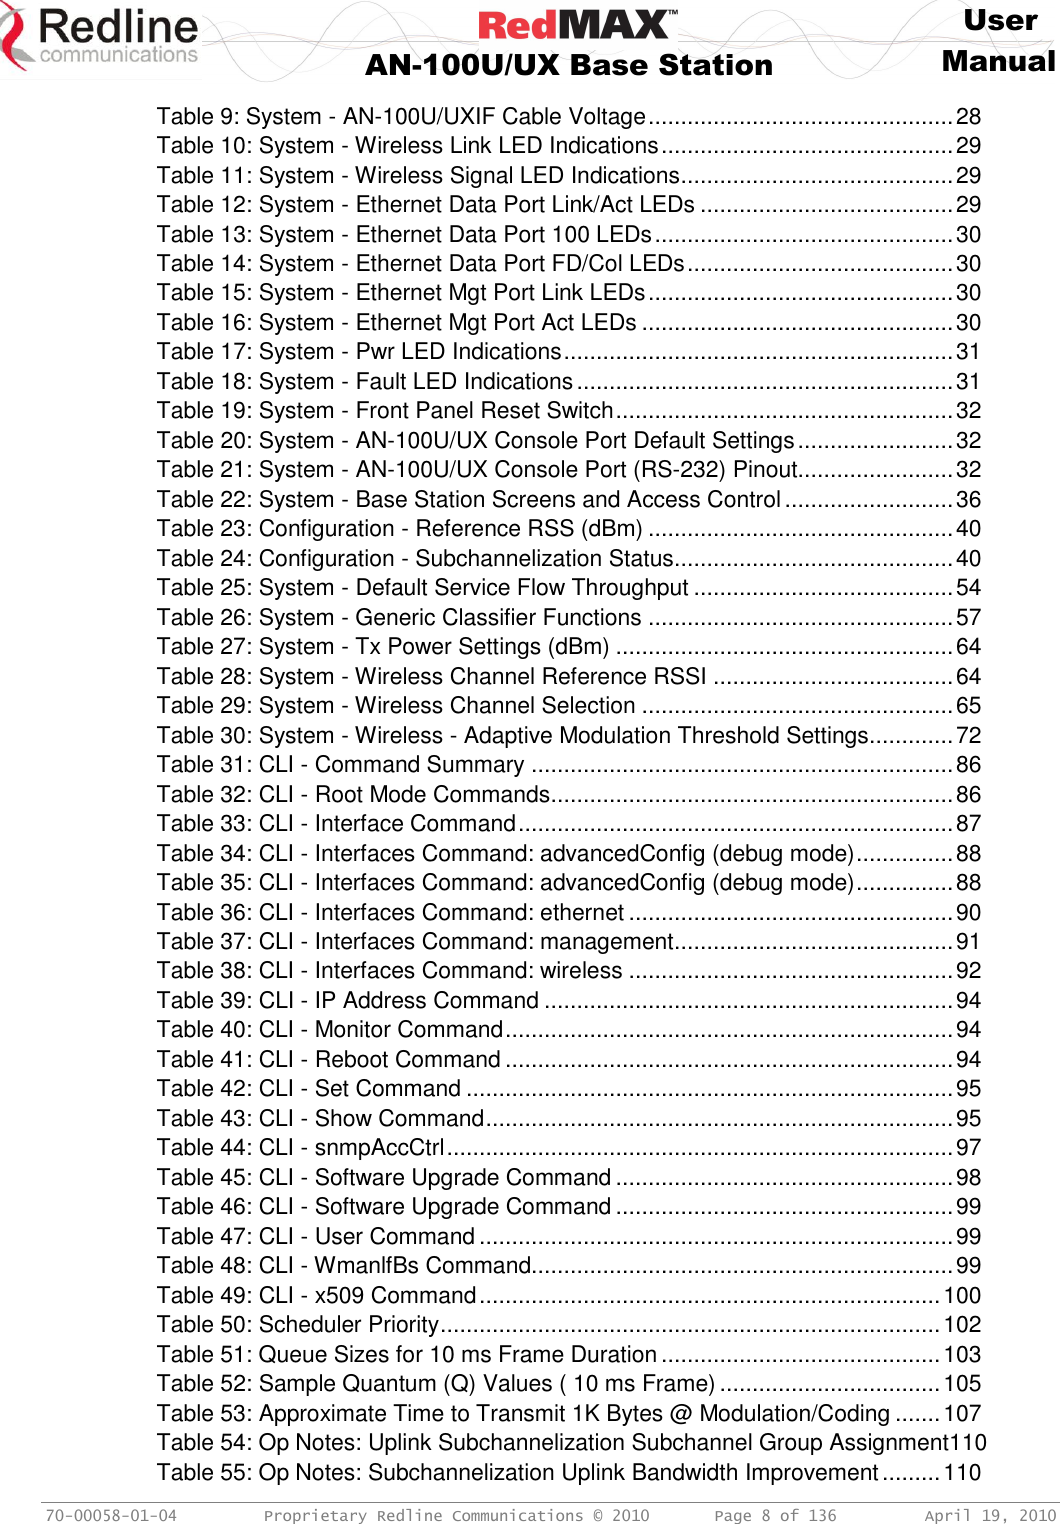     User  AN-100U/UX Base Station Manual   70-00058-01-04  Proprietary Redline Communications © 2010   Page 8 of 136  April 19, 2010 Table 9: System - AN-100U/UXIF Cable Voltage ............................................... 28 Table 10: System - Wireless Link LED Indications ............................................. 29 Table 11: System - Wireless Signal LED Indications .......................................... 29 Table 12: System - Ethernet Data Port Link/Act LEDs ....................................... 29 Table 13: System - Ethernet Data Port 100 LEDs .............................................. 30 Table 14: System - Ethernet Data Port FD/Col LEDs ......................................... 30 Table 15: System - Ethernet Mgt Port Link LEDs ............................................... 30 Table 16: System - Ethernet Mgt Port Act LEDs ................................................ 30 Table 17: System - Pwr LED Indications ............................................................ 31 Table 18: System - Fault LED Indications .......................................................... 31 Table 19: System - Front Panel Reset Switch .................................................... 32 Table 20: System - AN-100U/UX Console Port Default Settings ........................ 32 Table 21: System - AN-100U/UX Console Port (RS-232) Pinout........................ 32 Table 22: System - Base Station Screens and Access Control .......................... 36 Table 23: Configuration - Reference RSS (dBm) ............................................... 40 Table 24: Configuration - Subchannelization Status ........................................... 40 Table 25: System - Default Service Flow Throughput ........................................ 54 Table 26: System - Generic Classifier Functions ............................................... 57 Table 27: System - Tx Power Settings (dBm) .................................................... 64 Table 28: System - Wireless Channel Reference RSSI ..................................... 64 Table 29: System - Wireless Channel Selection ................................................ 65 Table 30: System - Wireless - Adaptive Modulation Threshold Settings ............. 72 Table 31: CLI - Command Summary ................................................................. 86 Table 32: CLI - Root Mode Commands .............................................................. 86 Table 33: CLI - Interface Command ................................................................... 87 Table 34: CLI - Interfaces Command: advancedConfig (debug mode) ............... 88 Table 35: CLI - Interfaces Command: advancedConfig (debug mode) ............... 88 Table 36: CLI - Interfaces Command: ethernet .................................................. 90 Table 37: CLI - Interfaces Command: management ........................................... 91 Table 38: CLI - Interfaces Command: wireless .................................................. 92 Table 39: CLI - IP Address Command ............................................................... 94 Table 40: CLI - Monitor Command ..................................................................... 94 Table 41: CLI - Reboot Command ..................................................................... 94 Table 42: CLI - Set Command ........................................................................... 95 Table 43: CLI - Show Command ........................................................................ 95 Table 44: CLI - snmpAccCtrl .............................................................................. 97 Table 45: CLI - Software Upgrade Command .................................................... 98 Table 46: CLI - Software Upgrade Command .................................................... 99 Table 47: CLI - User Command ......................................................................... 99 Table 48: CLI - WmanlfBs Command................................................................. 99 Table 49: CLI - x509 Command ....................................................................... 100 Table 50: Scheduler Priority ............................................................................. 102 Table 51: Queue Sizes for 10 ms Frame Duration ........................................... 103 Table 52: Sample Quantum (Q) Values ( 10 ms Frame) .................................. 105 Table 53: Approximate Time to Transmit 1K Bytes @ Modulation/Coding ....... 107 Table 54: Op Notes: Uplink Subchannelization Subchannel Group Assignment110 Table 55: Op Notes: Subchannelization Uplink Bandwidth Improvement ......... 110 